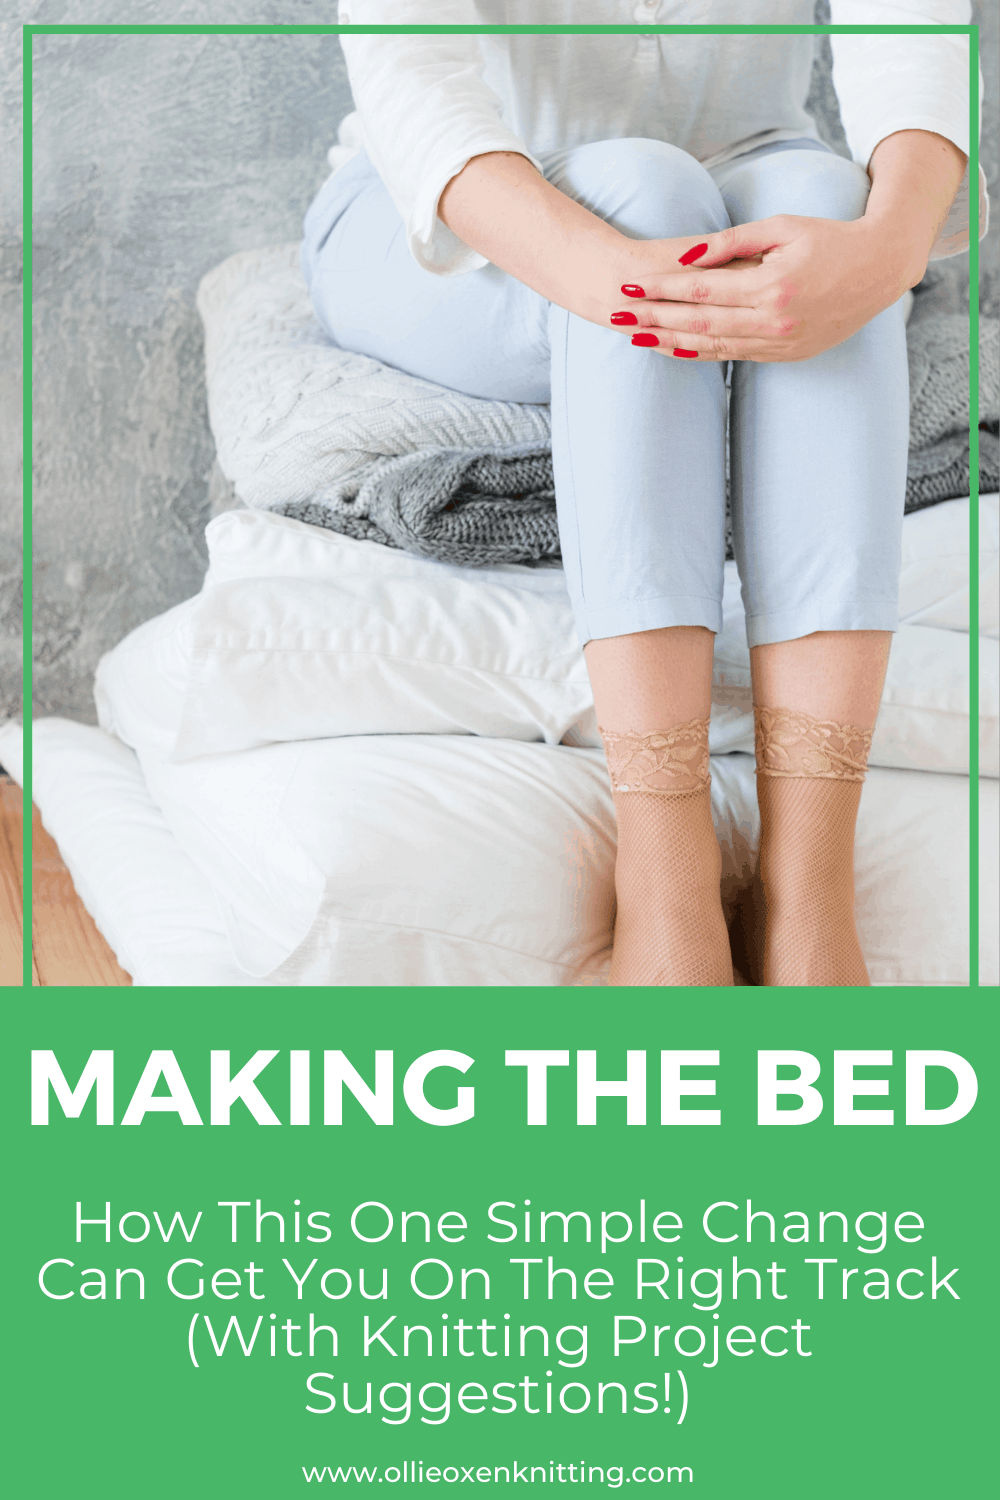 Making The Bed: How This One Simple Change Can Get You On The Right Track (With Knitting Project Suggestions!) | Ollie Oxen Knitting